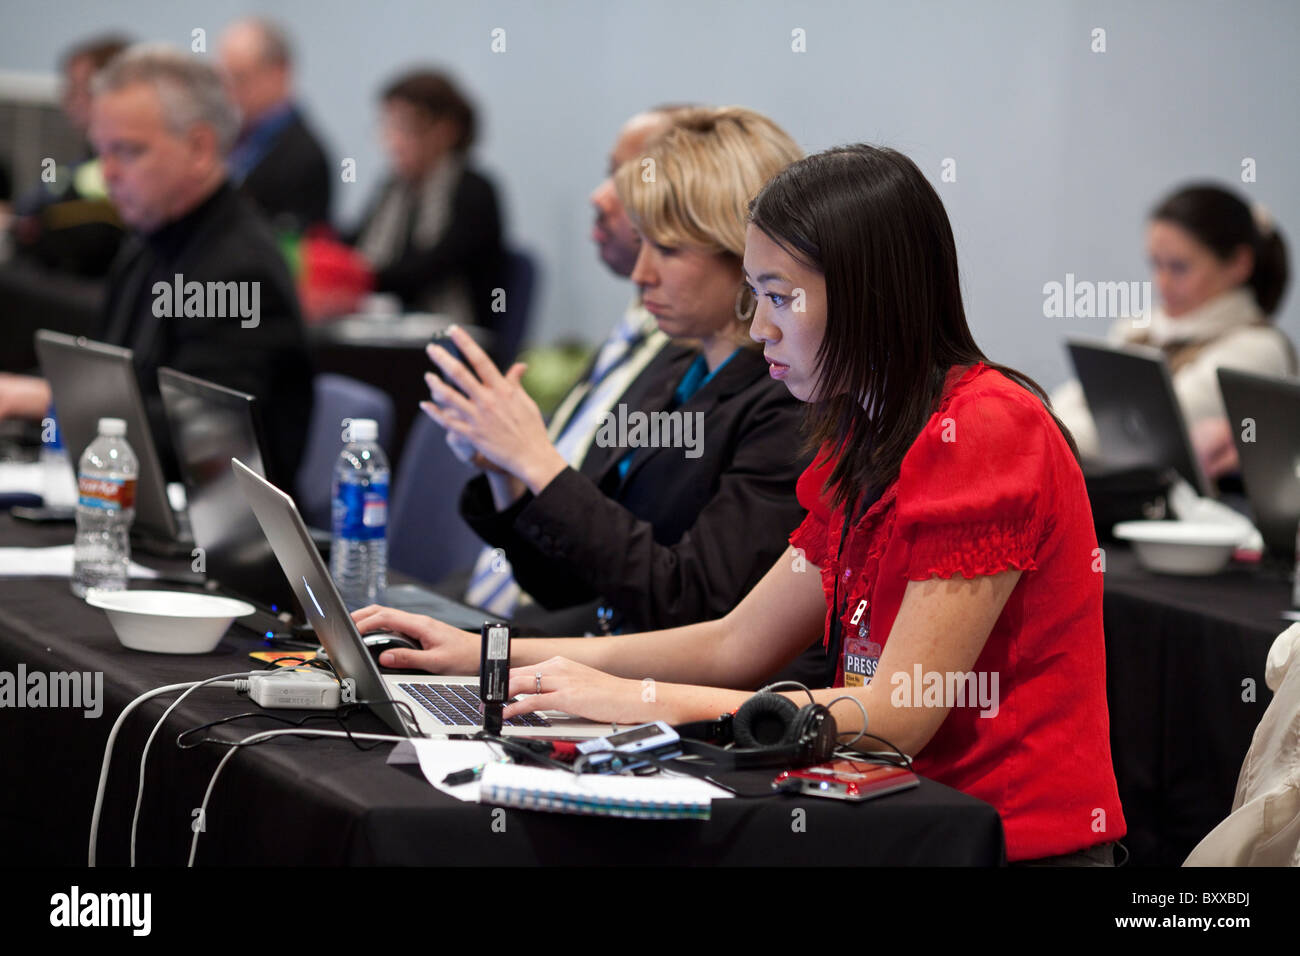 Journalists on press row cover a televised debate between candidates for governor of Texas at the University of North Texas Stock Photo